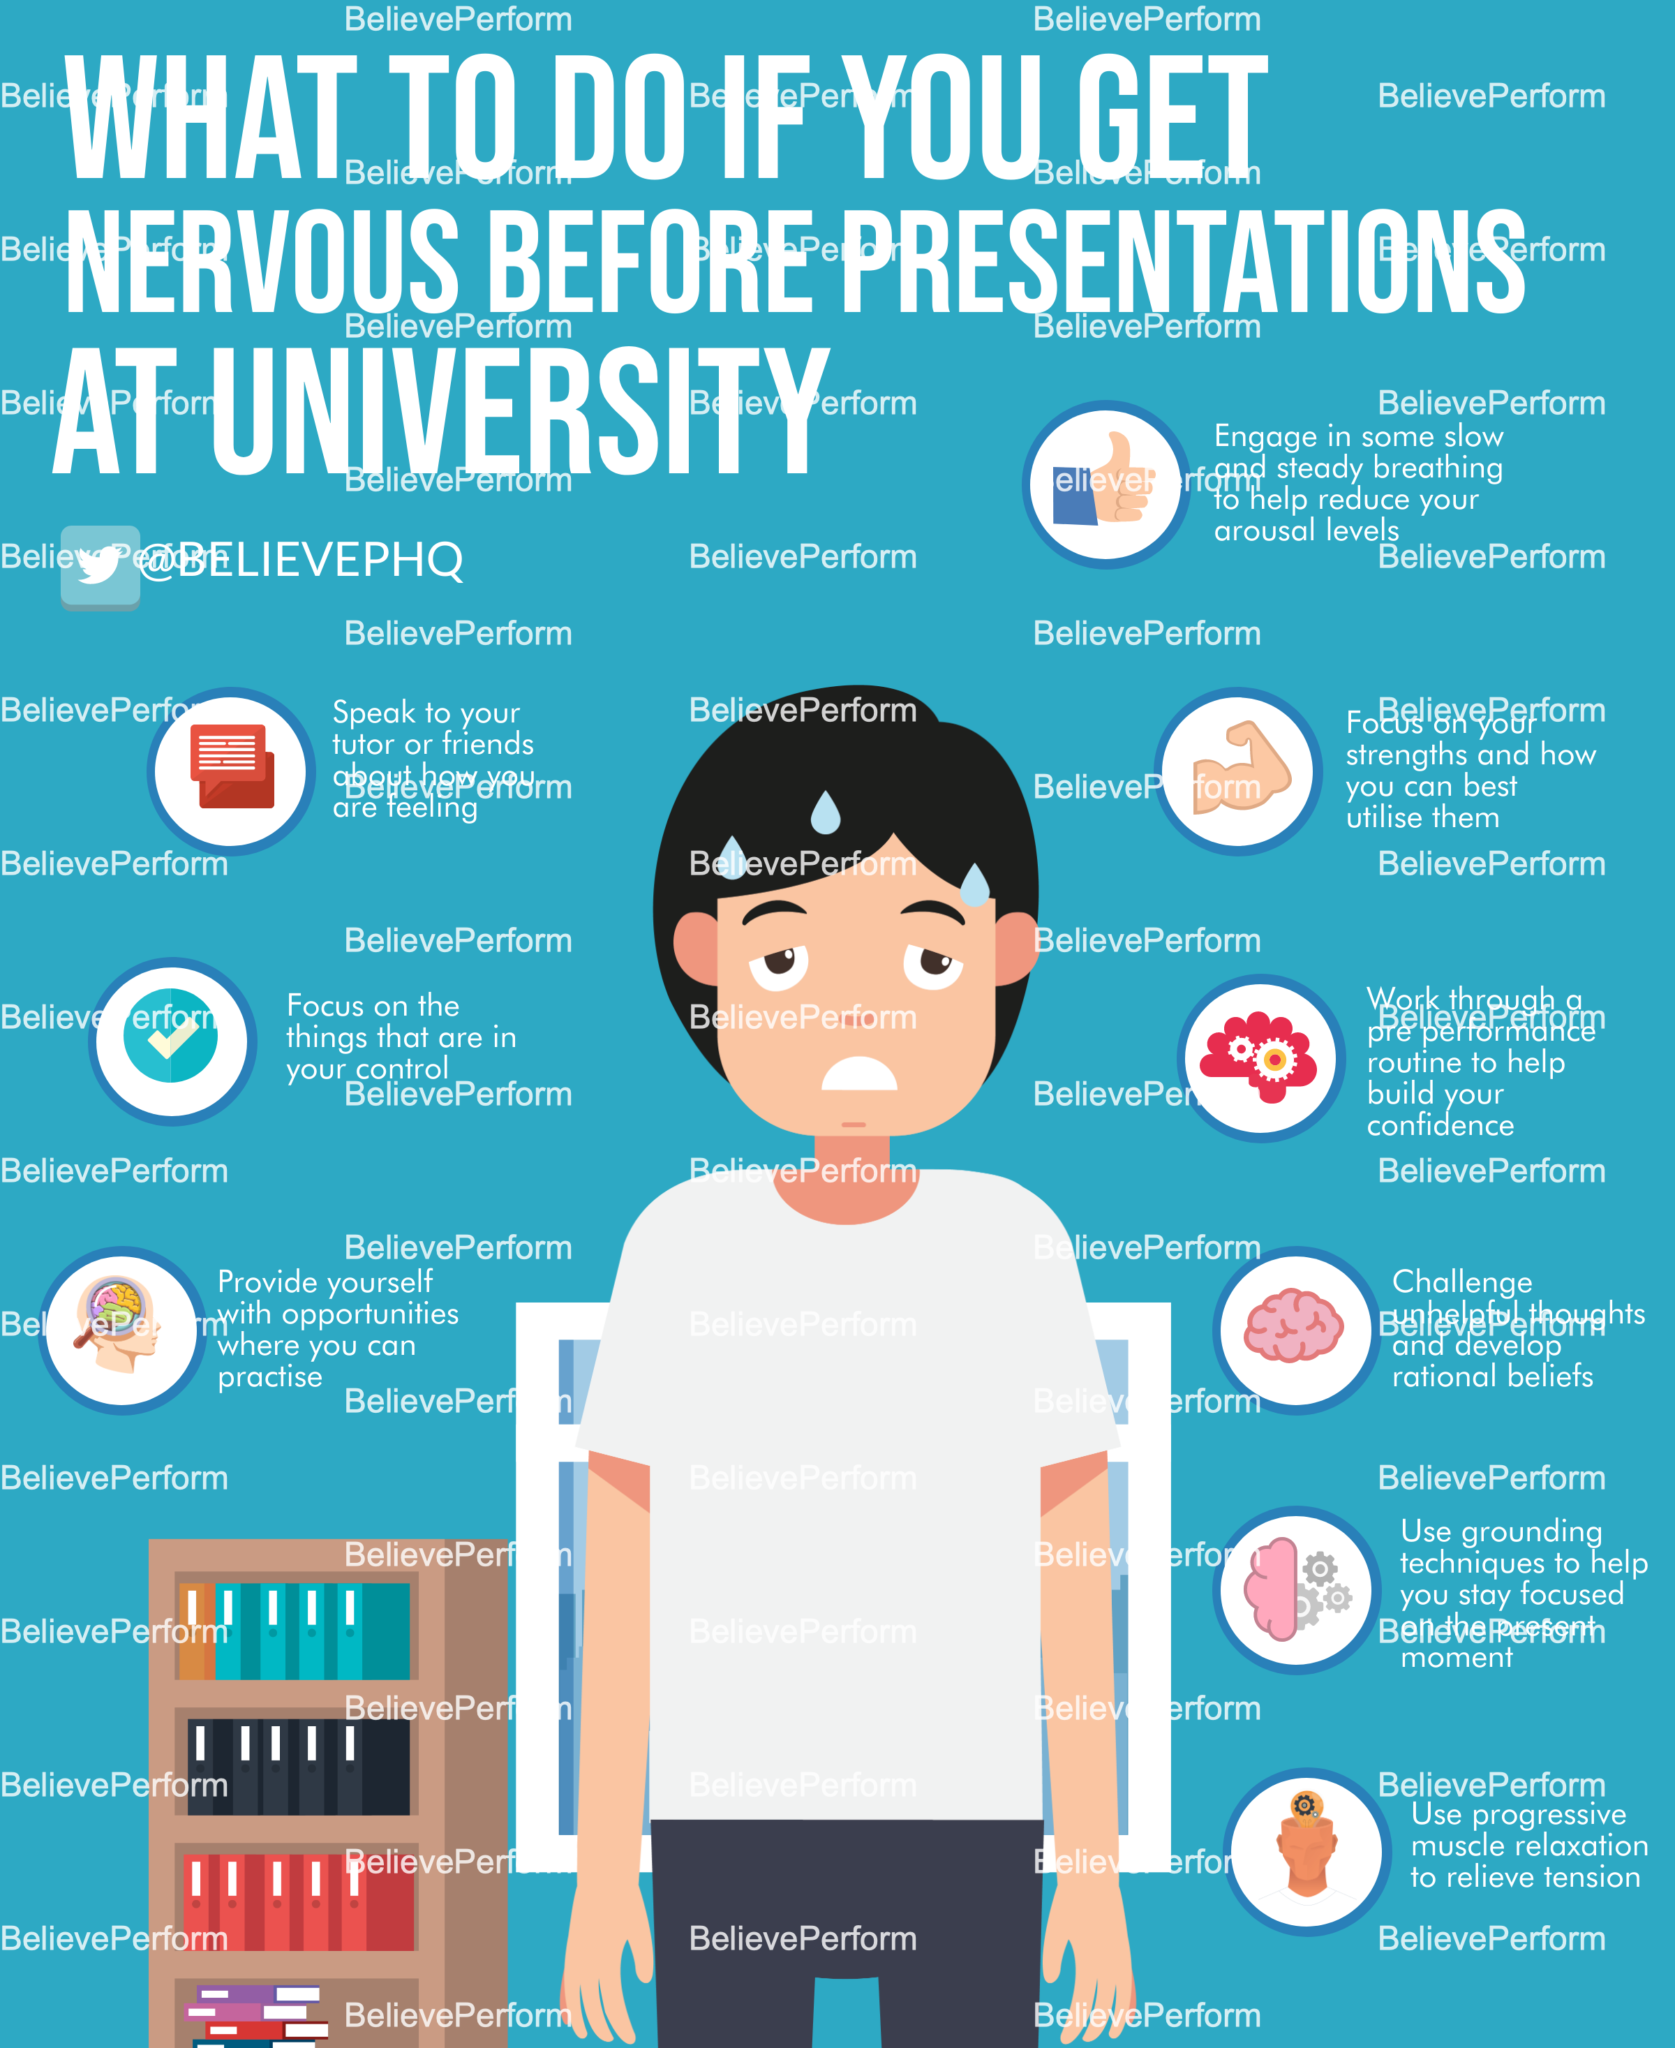 What To Do If You Get Nervous Before Presentations At University BelievePerform The UK s